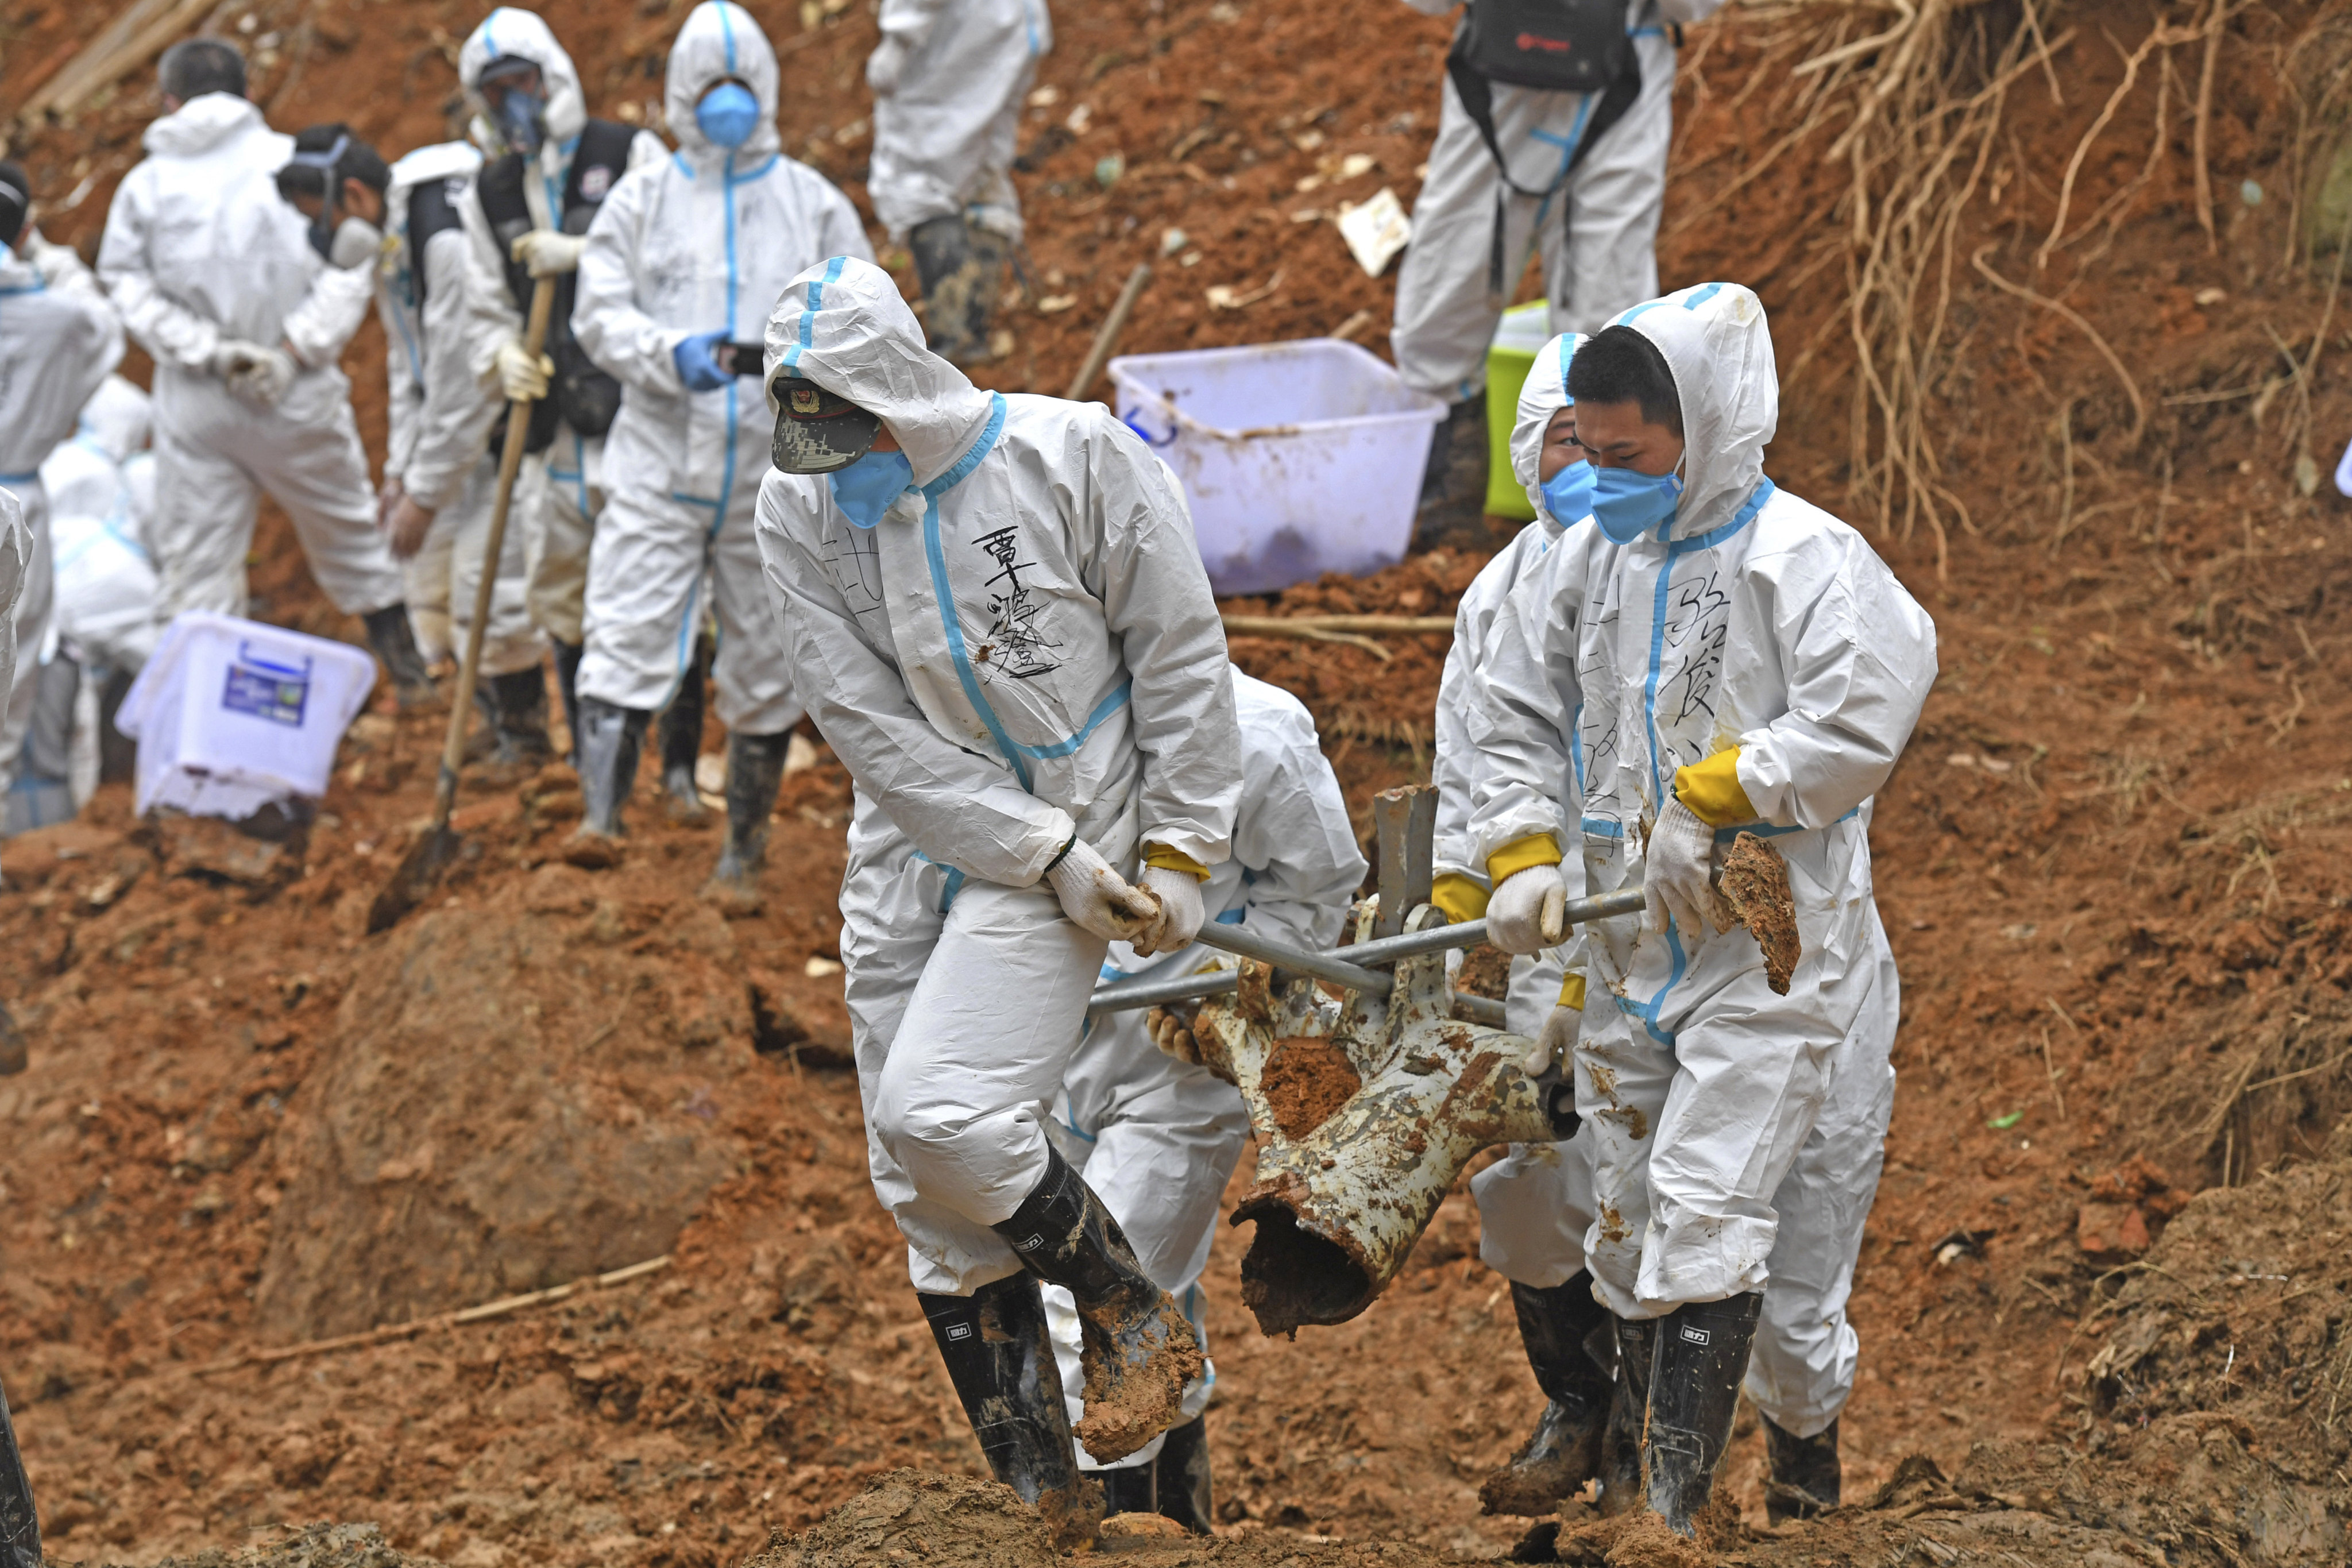 Rescuers carry a piece of plane wreckage from the China Eastern flight crash site on March 25. Photo: Xinhua via AP